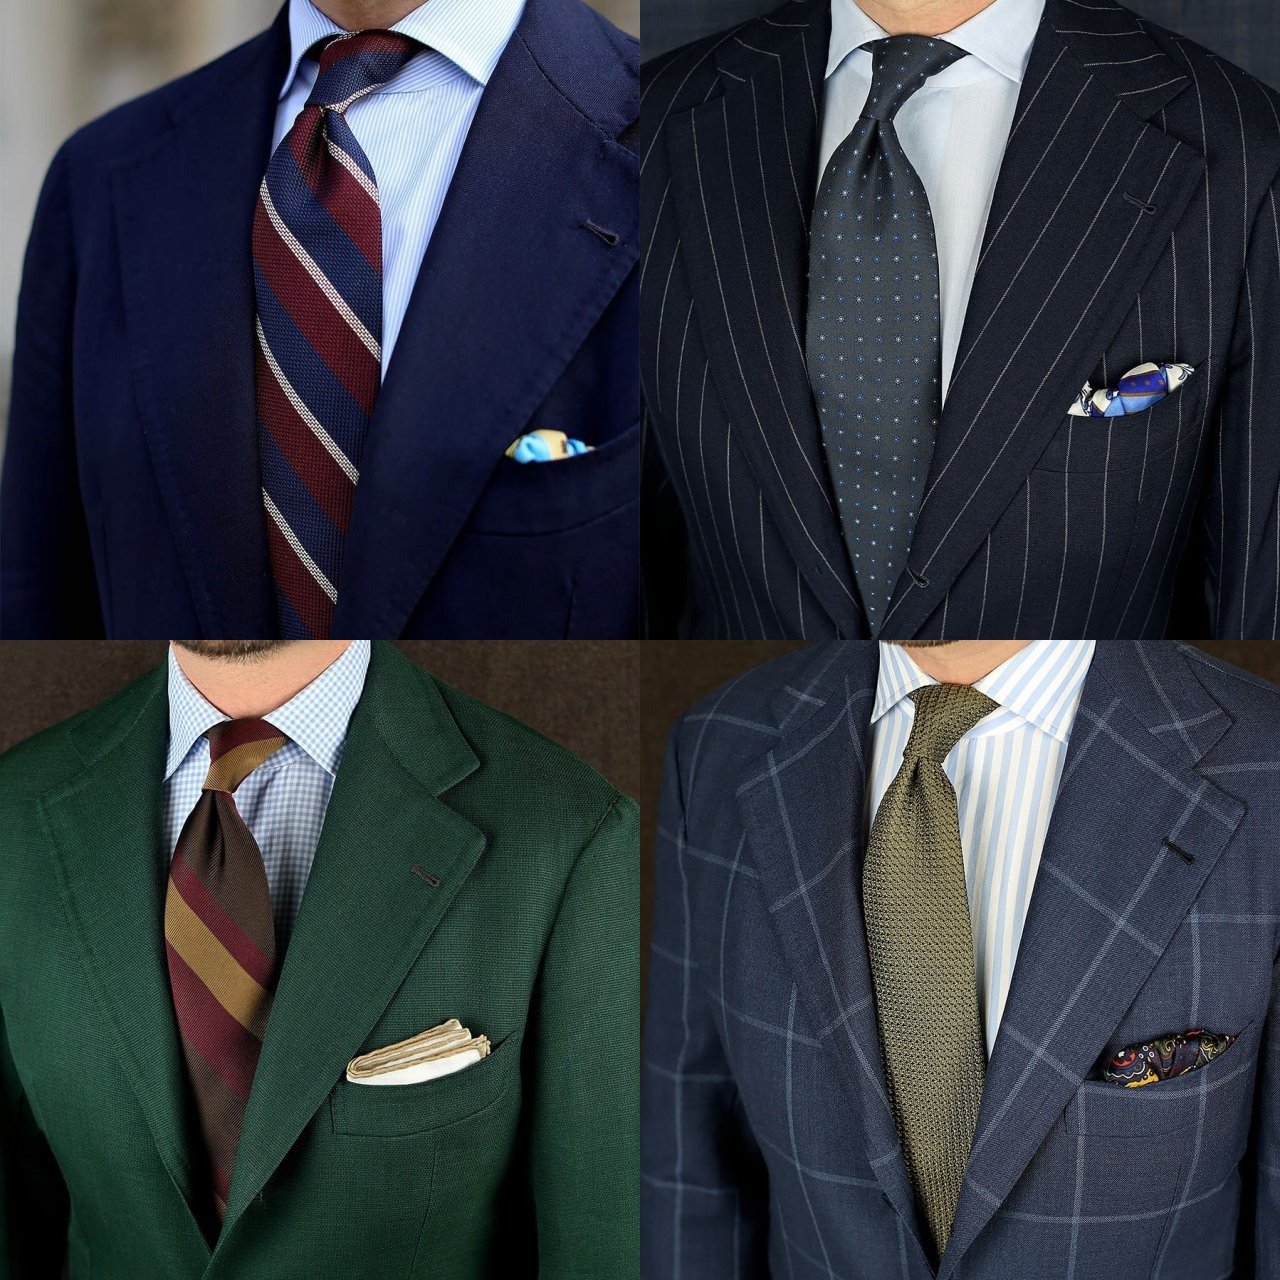 How to match a tie to shirt and suit - two patterns